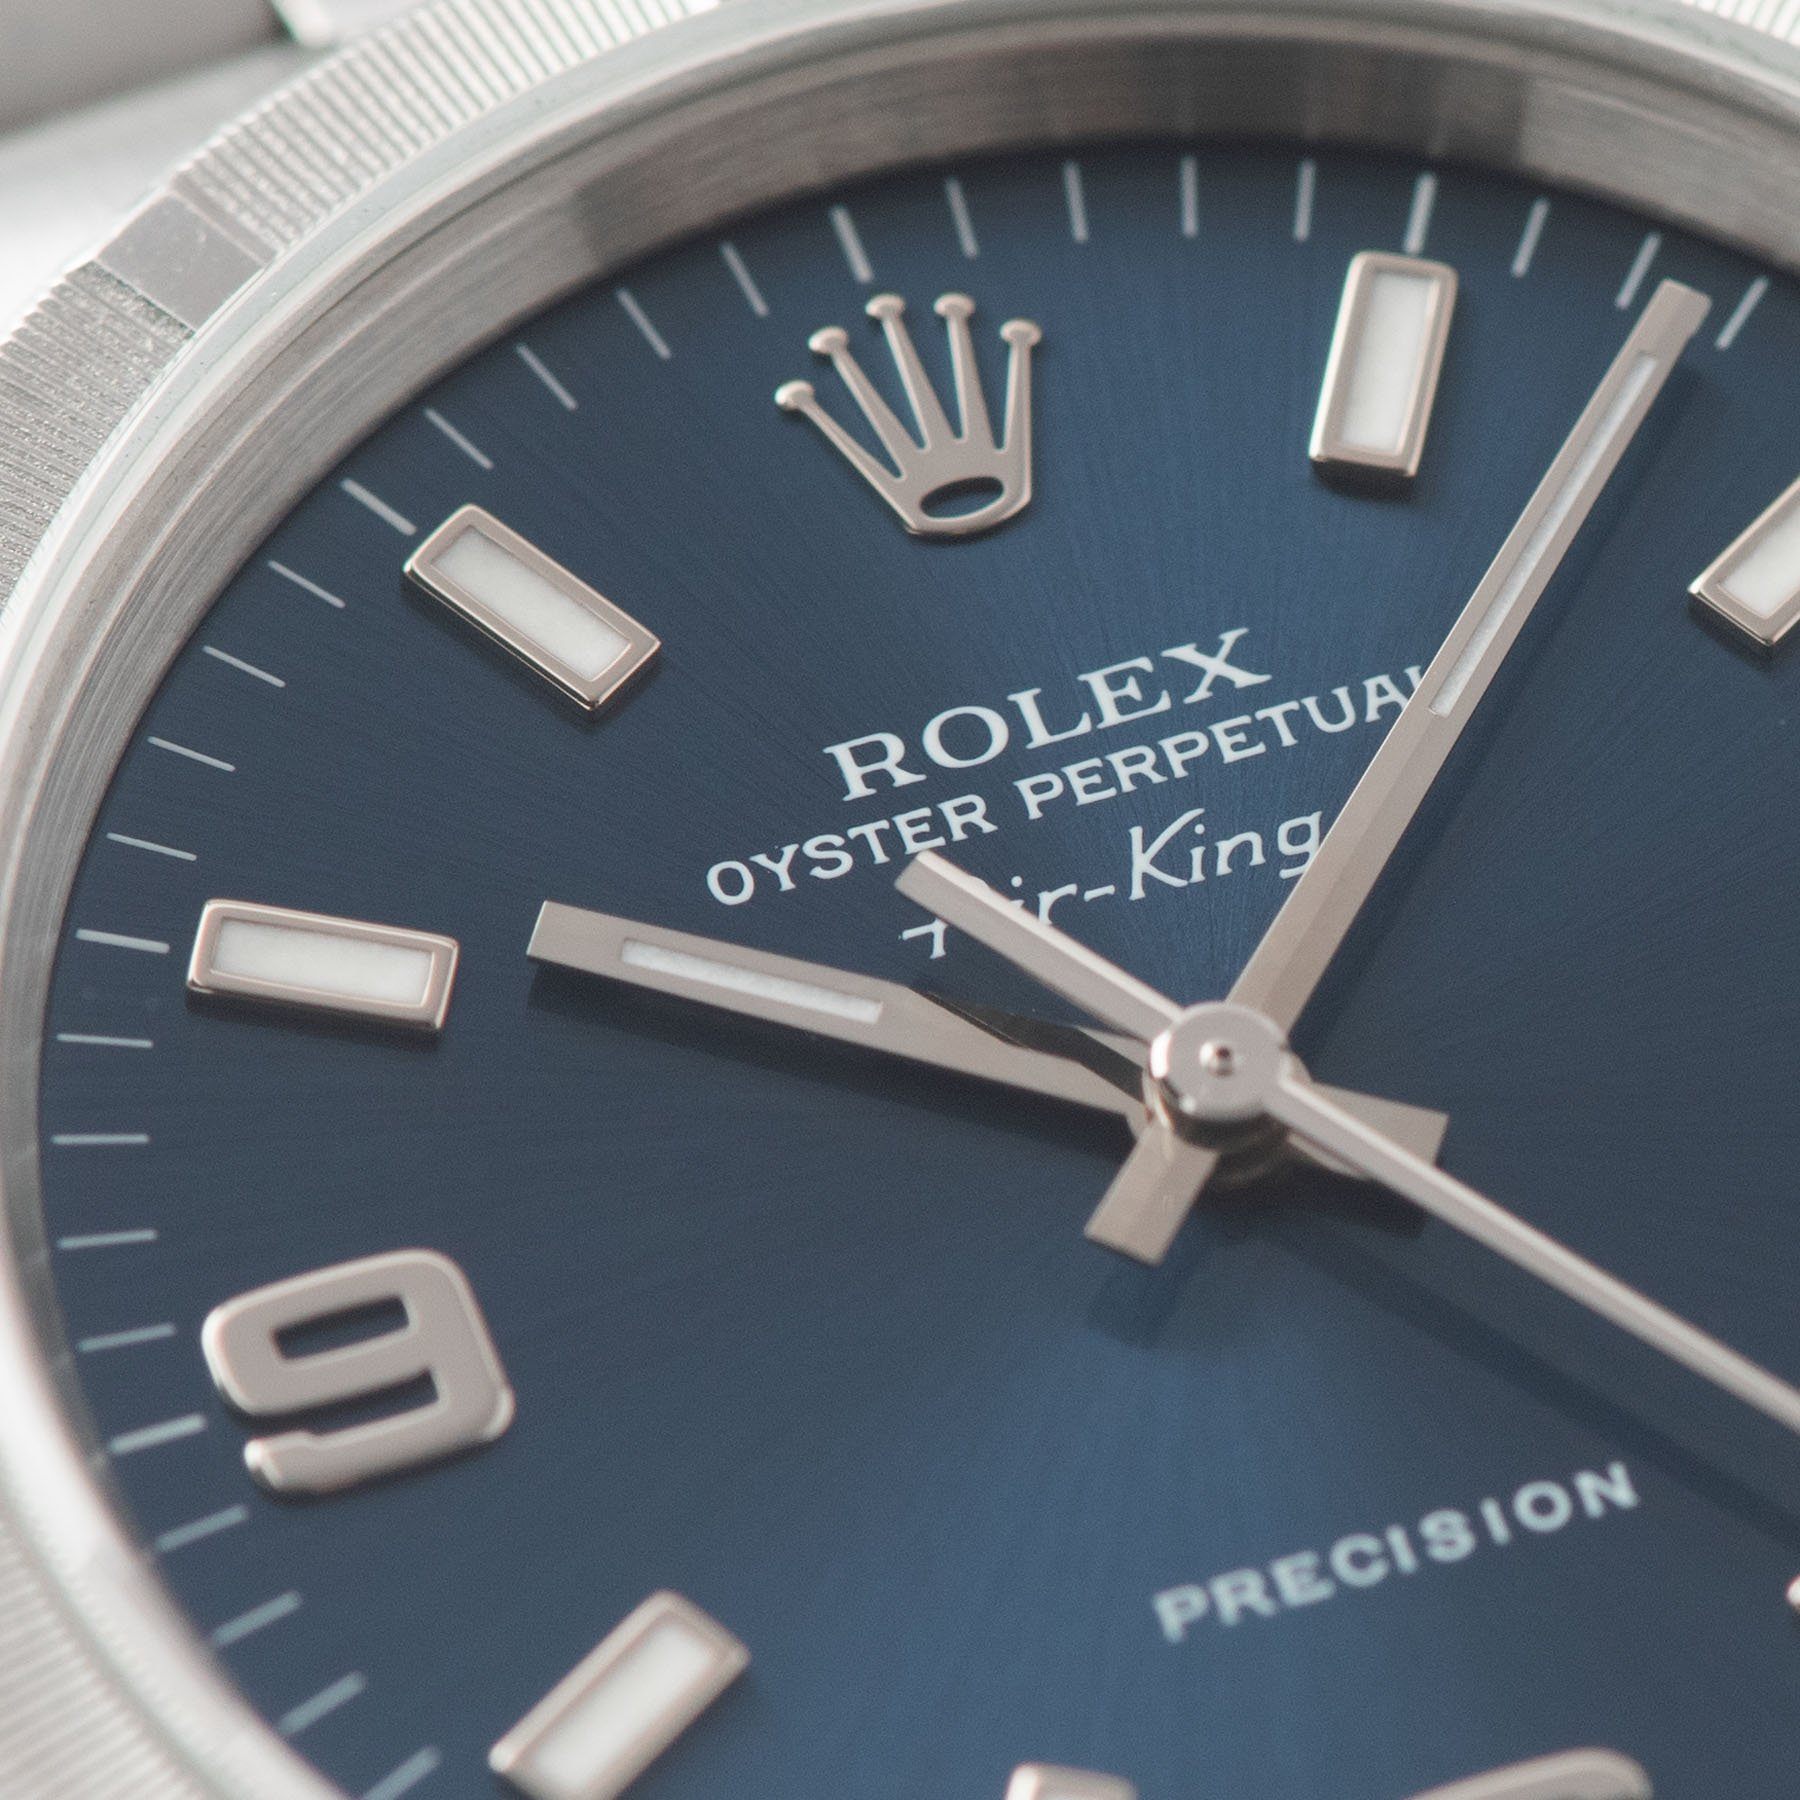 Rolex Air King Reference 14010 Blue Explorer Dial